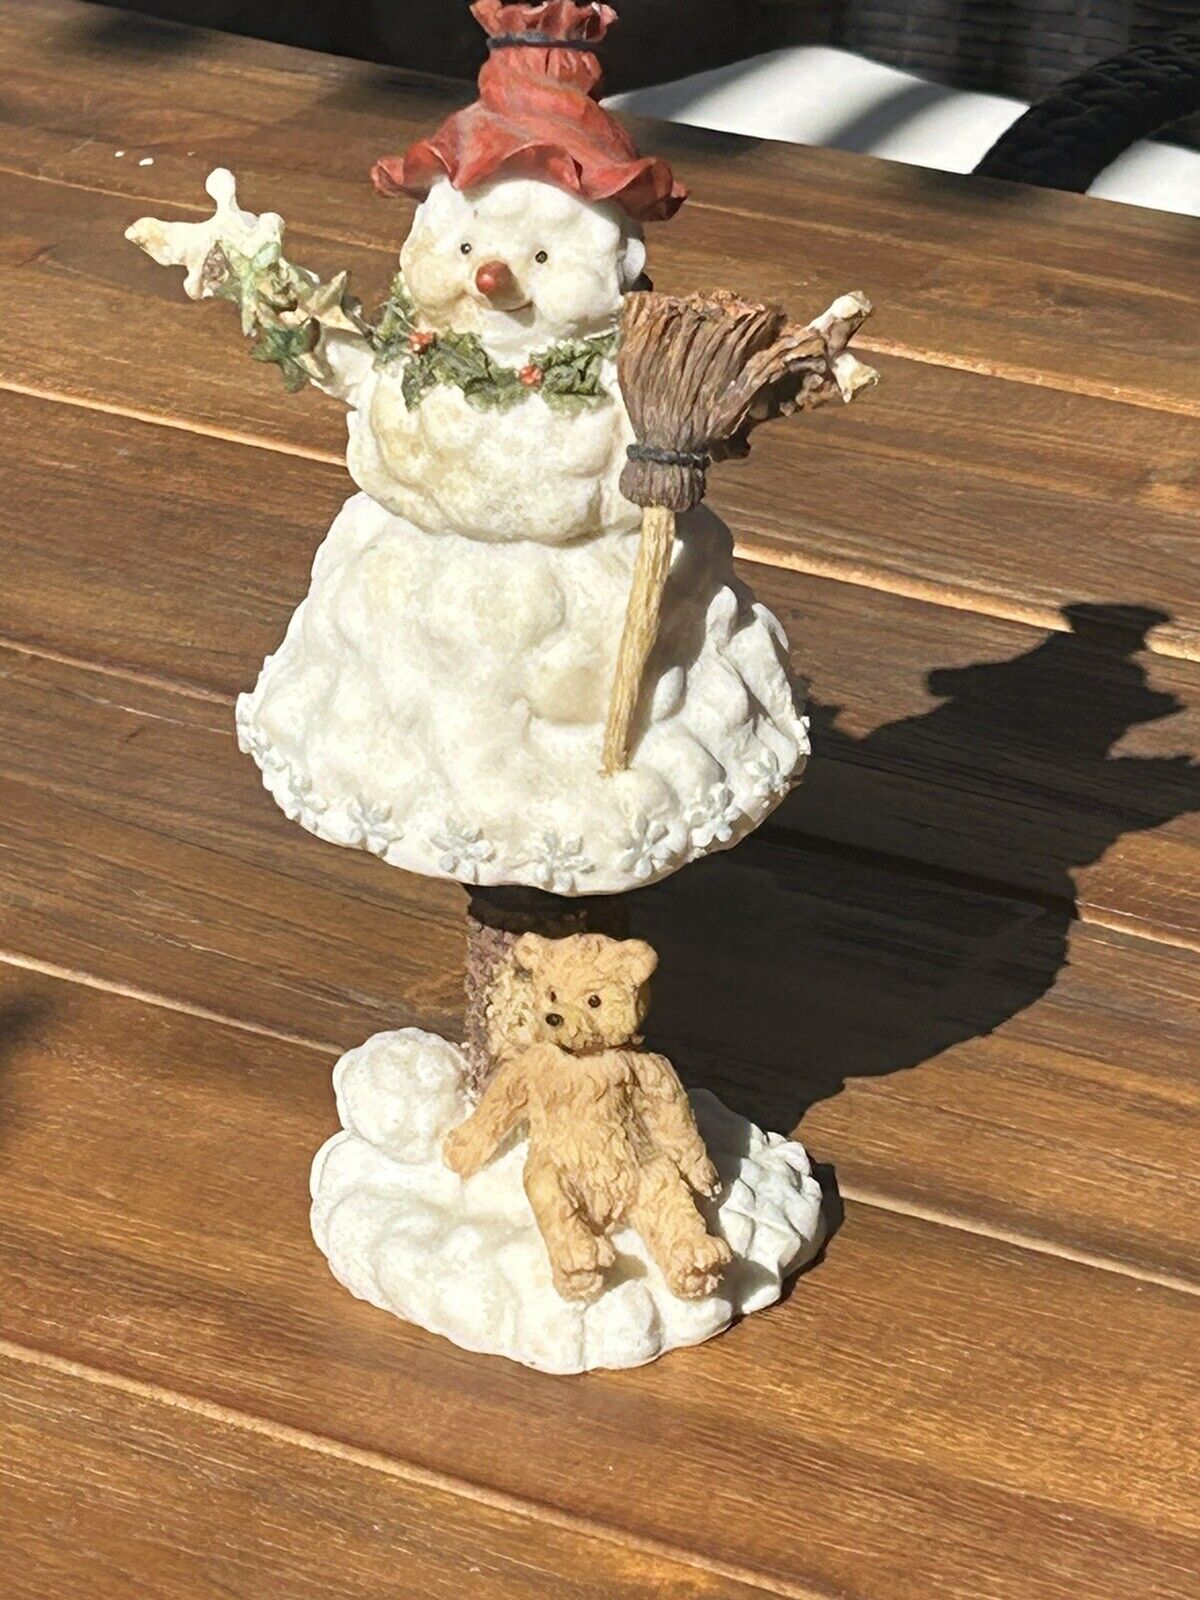 Vintage Snowman Christmas Tree Figurine With Teddy Bear Resin 9” White Red Brown